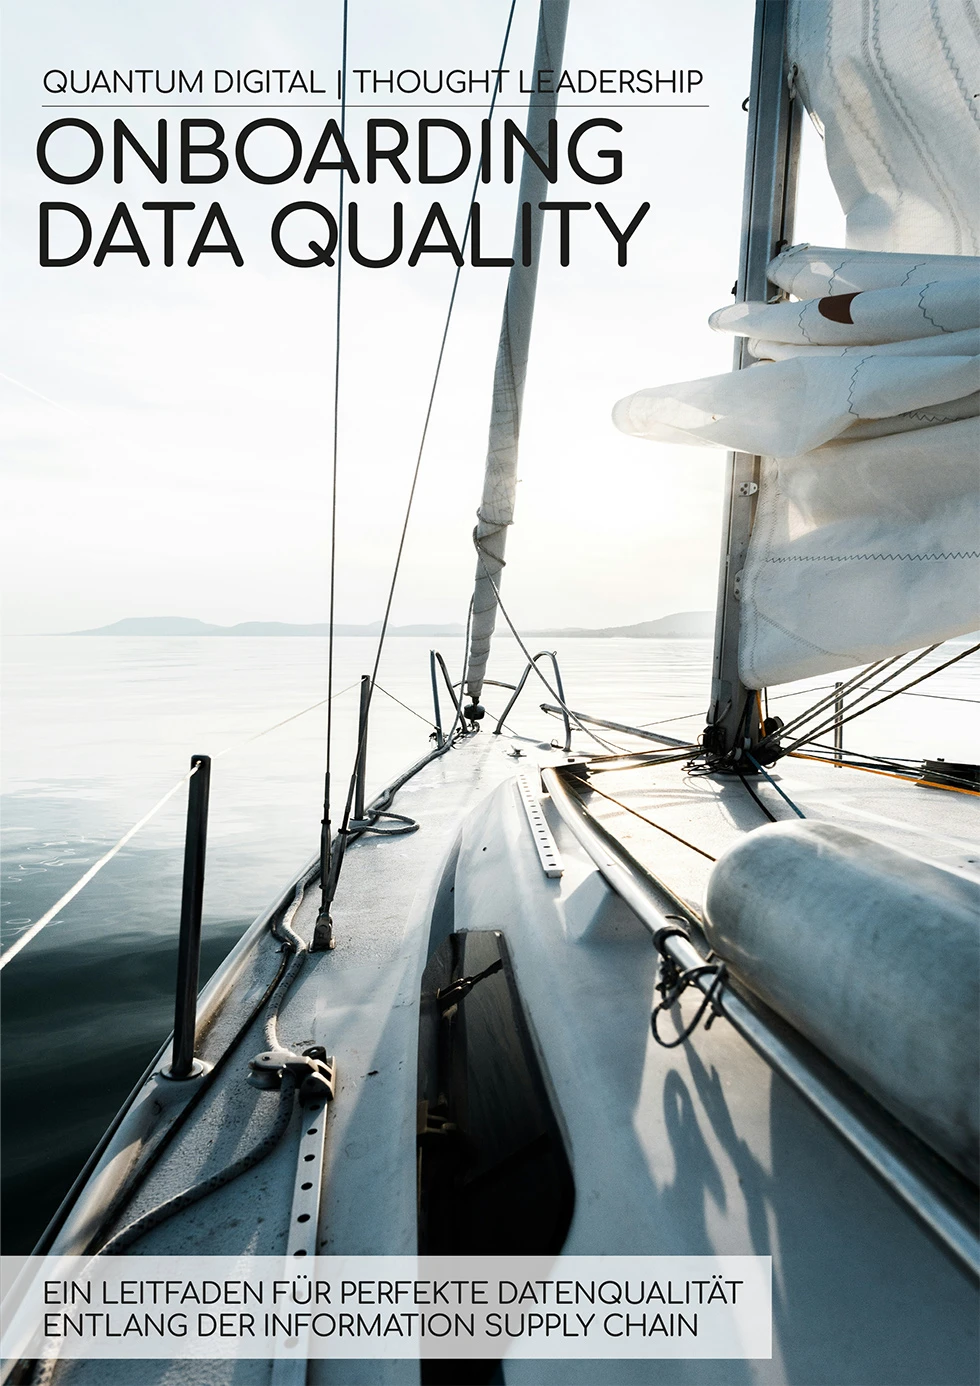 Thought Leadership | Onboarding Data Quality